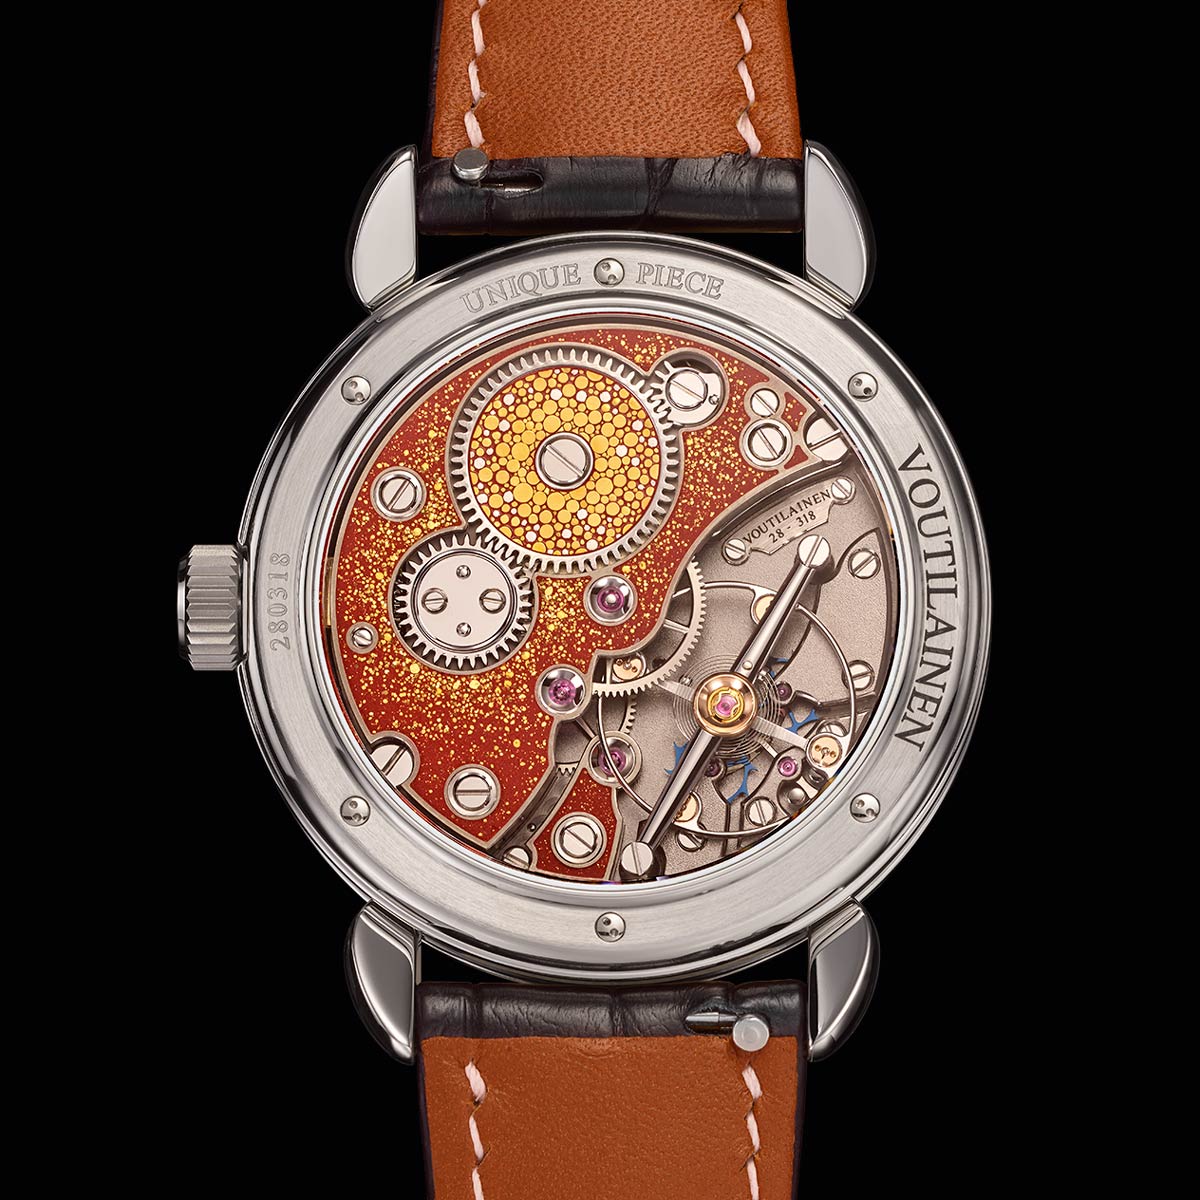 Voutilainen’s in house designed movement here shows in plain sight, his use of a free sprung balance (wheel diameter 13.60mm) with Grossman interior curve and Philips exterior curve, beating at 18'000 vph; coupled with two escapement wheels